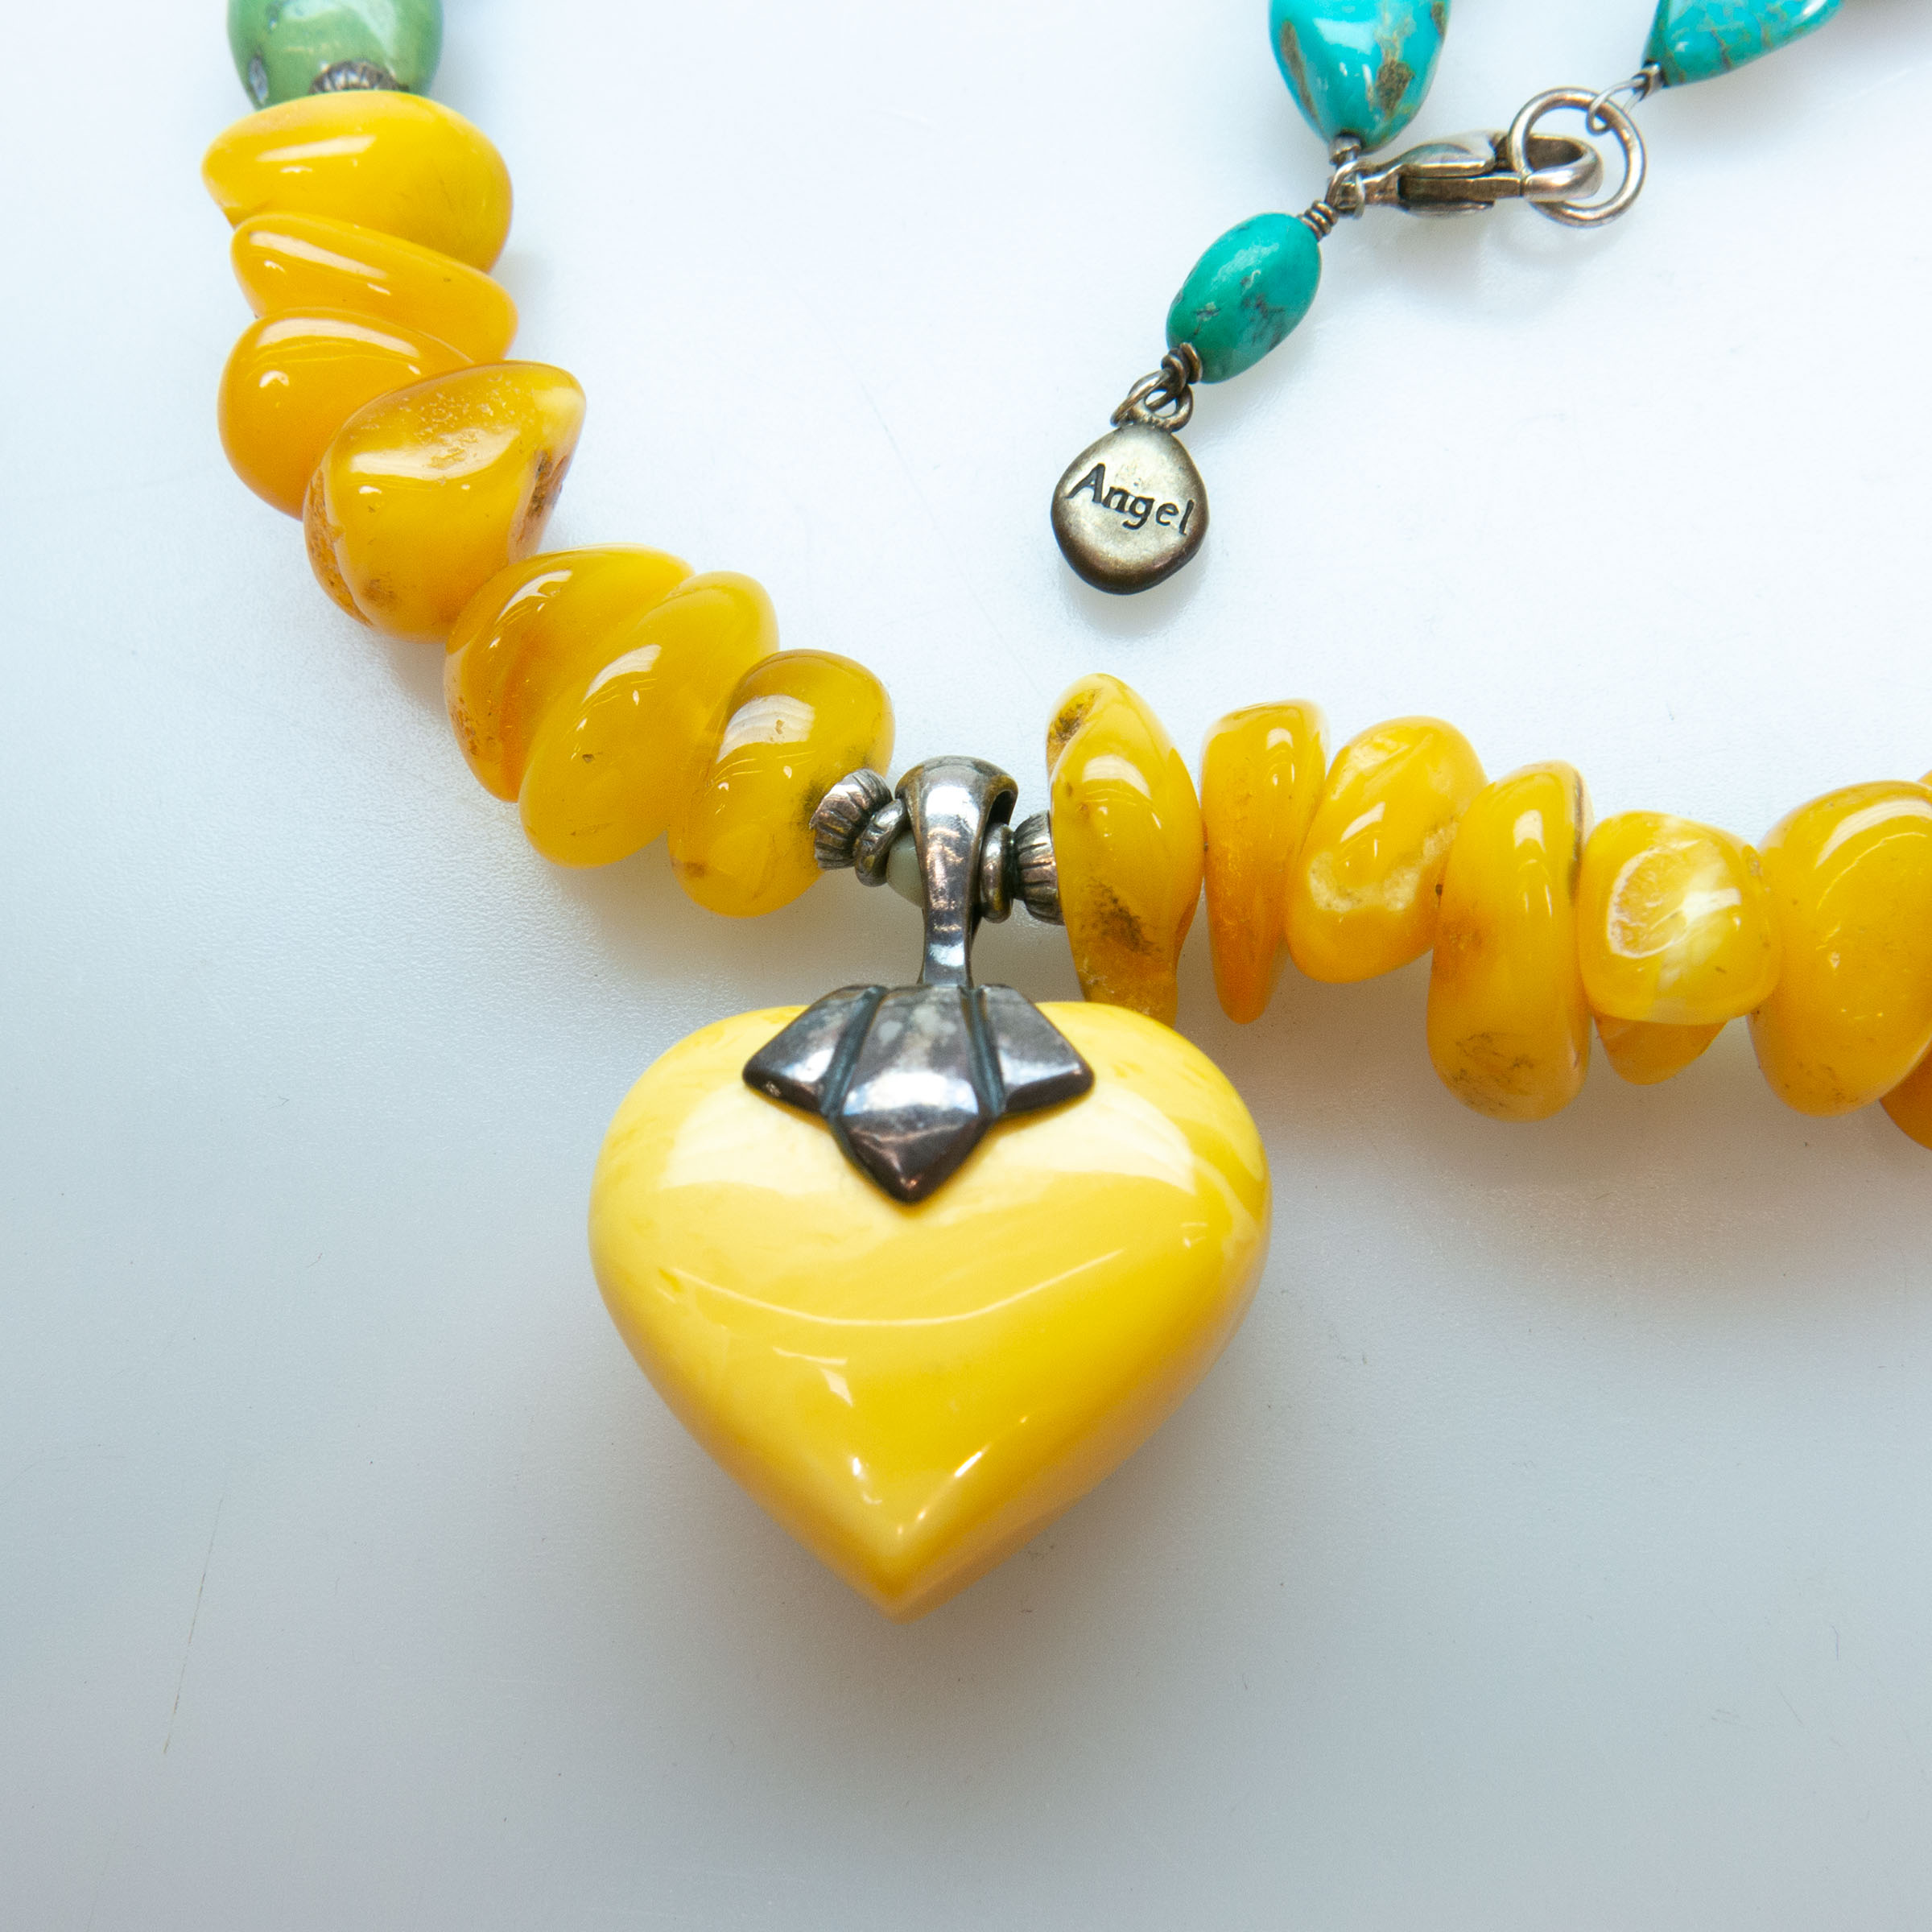 Amber And Turquoise Bead Necklace